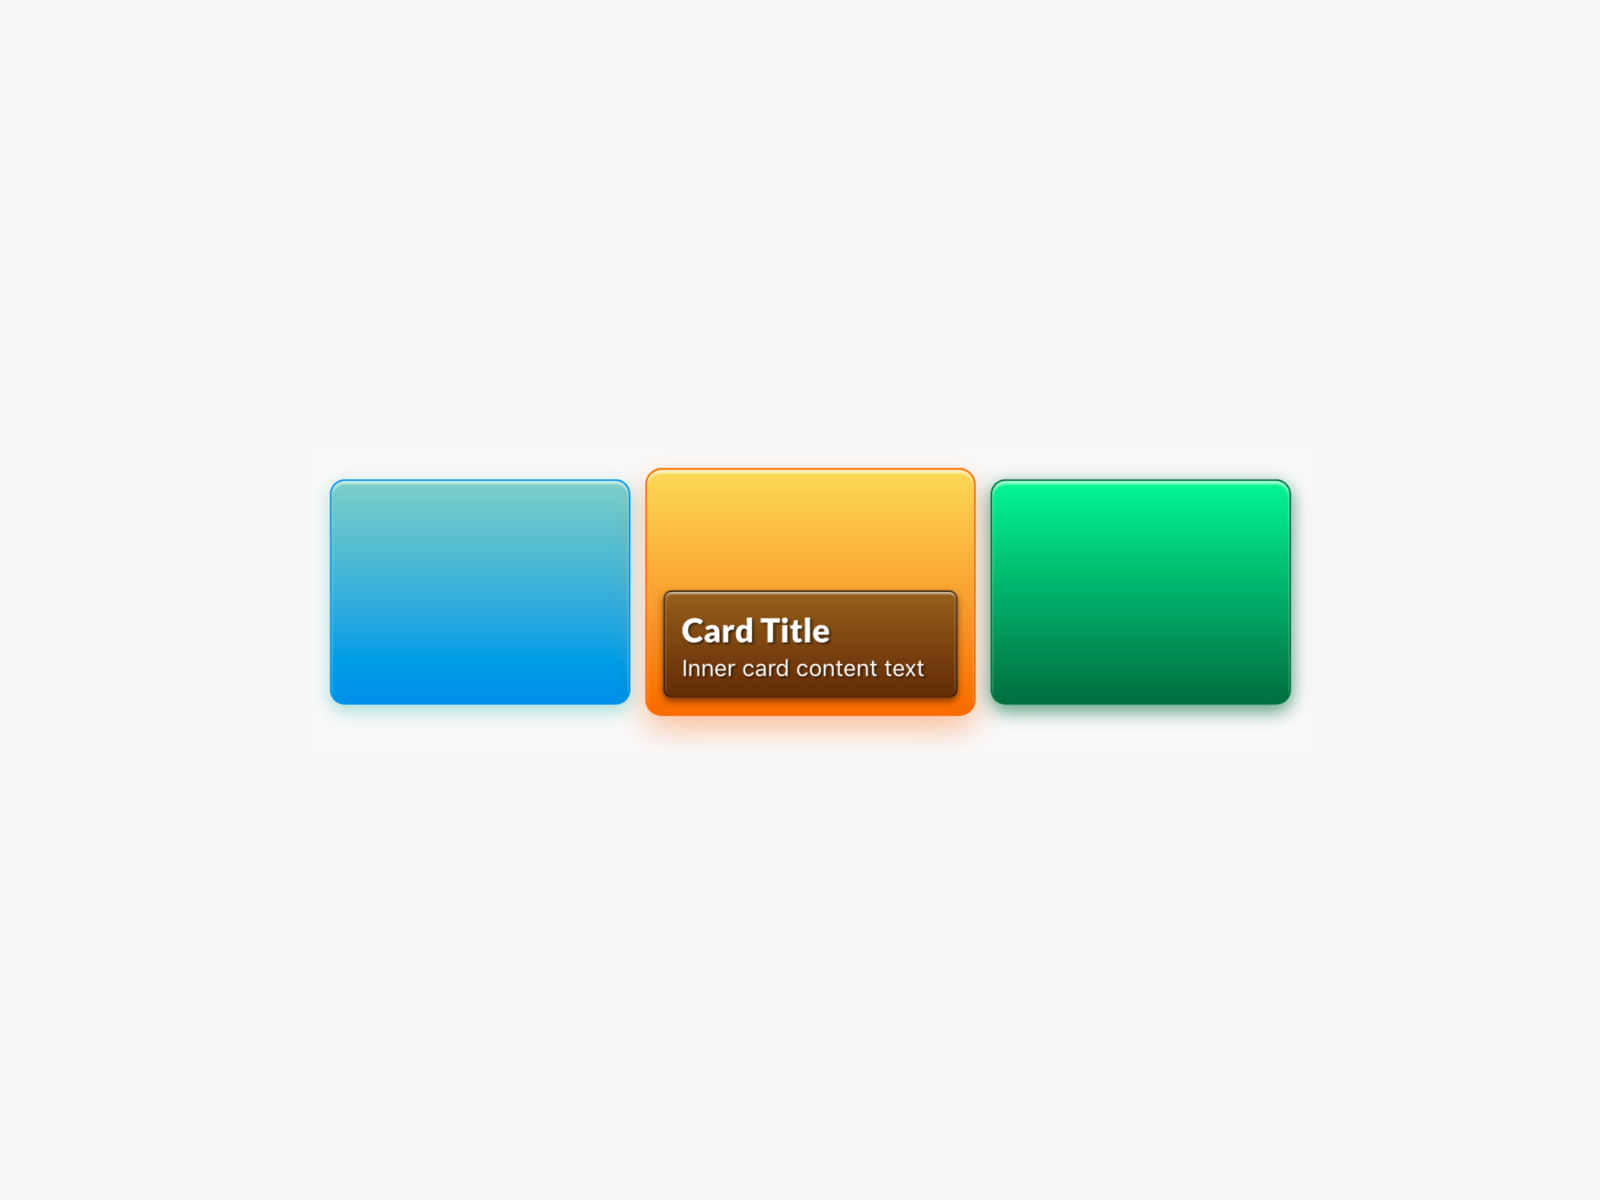 Animated Card Tiles (CSS) by tdarb on Dribbble